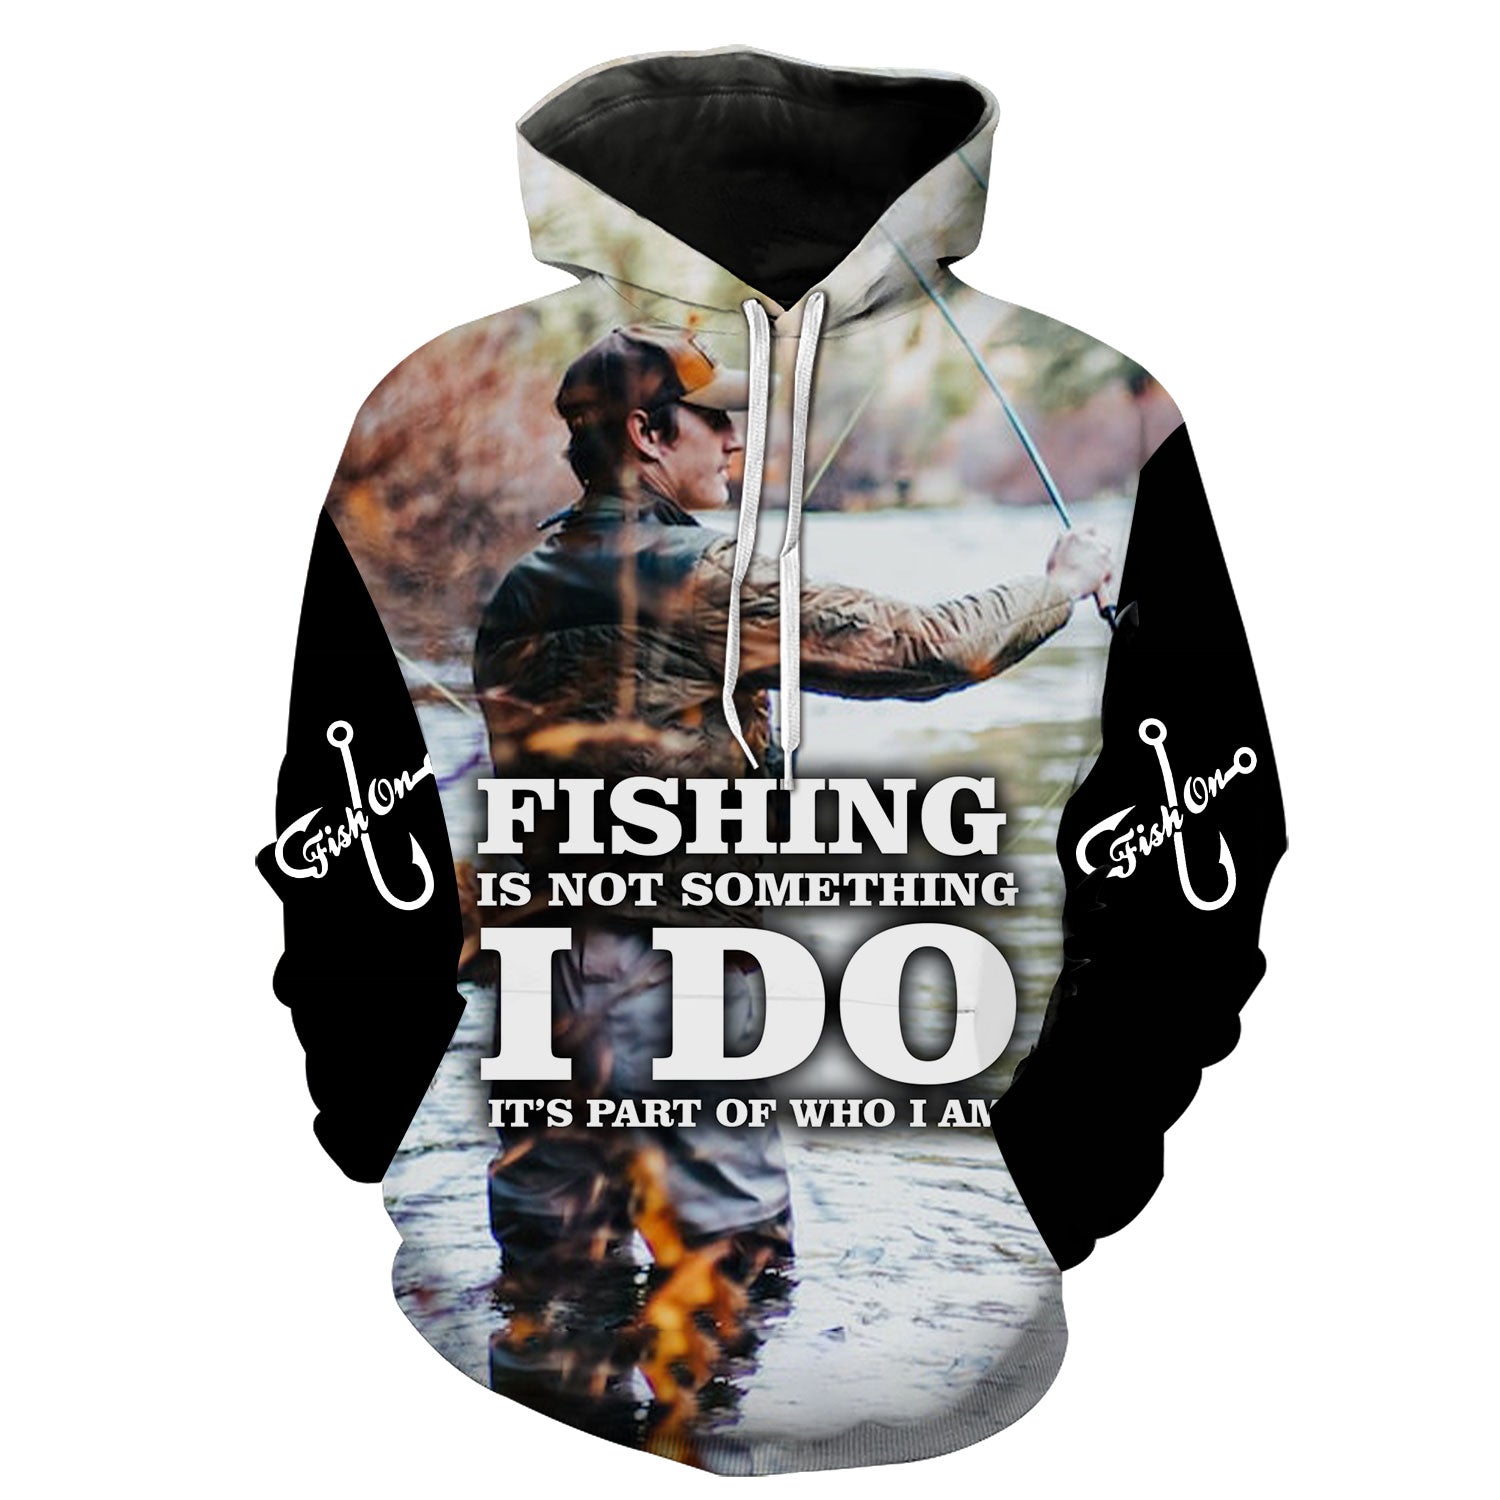 Fishing is a part of who I am - Hoodie